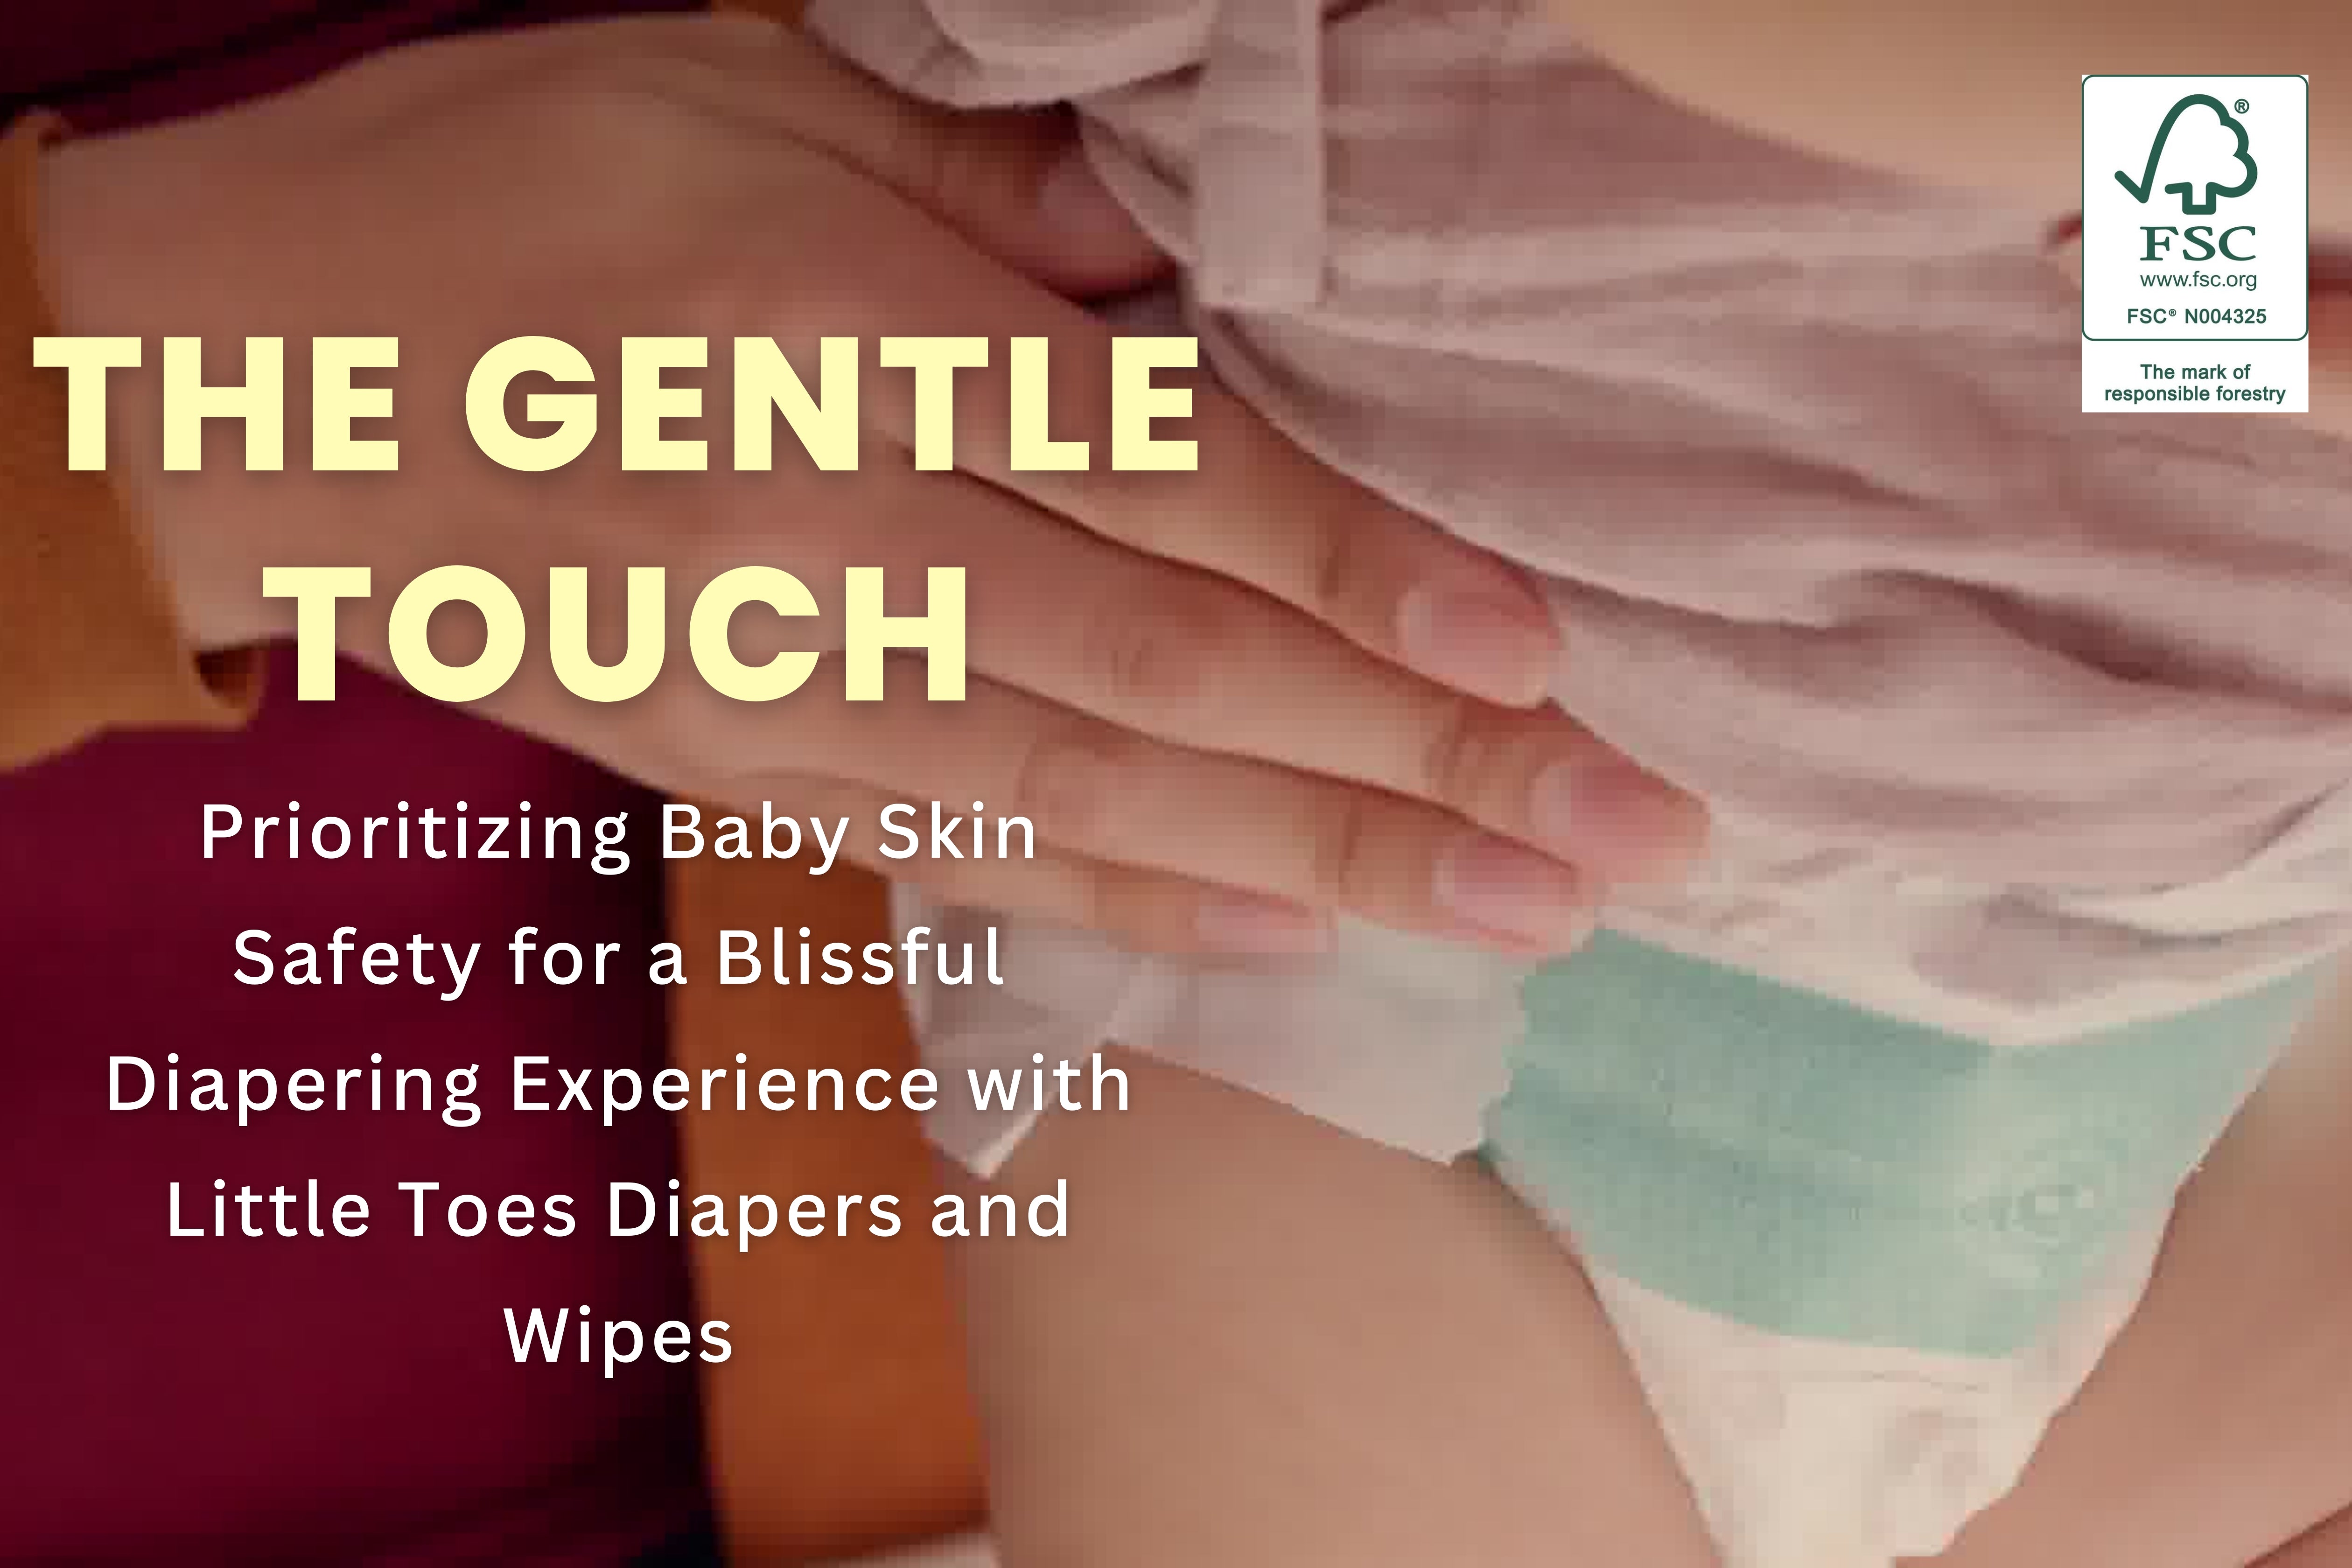 The Gentle Touch: Prioritizing Baby Skin Safety for a Blissful Diapering Experience with Little Toes Diapers and Wipes